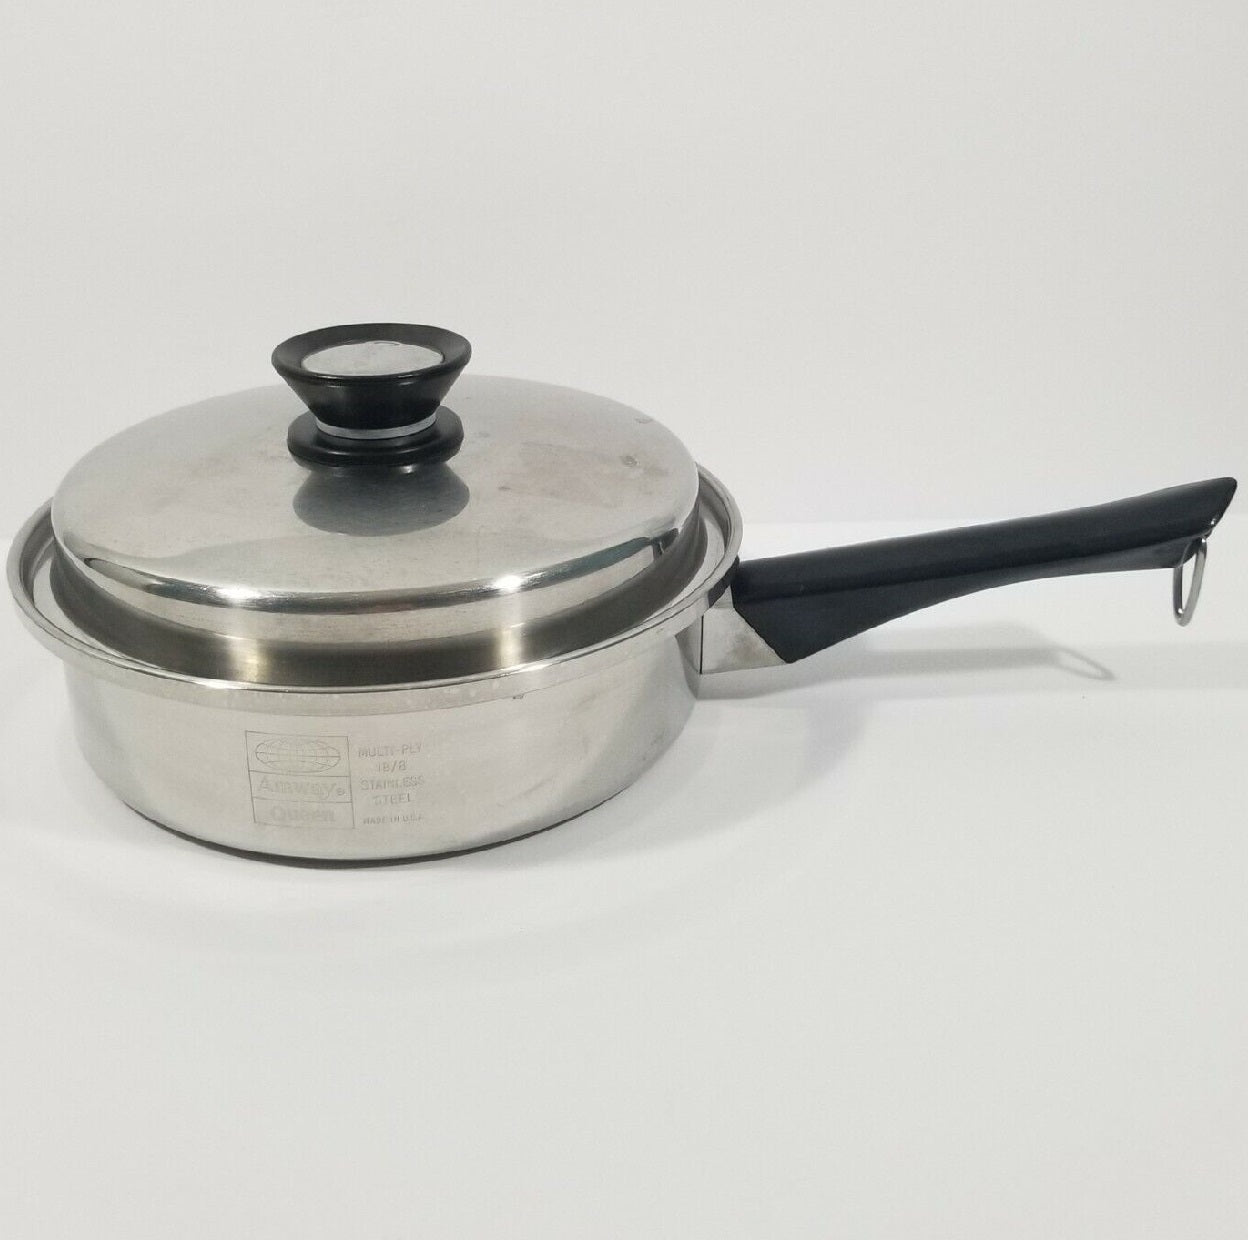 RECONDITIONED 11in Amway Queen SKILLET 18/8 Surgical Stainless